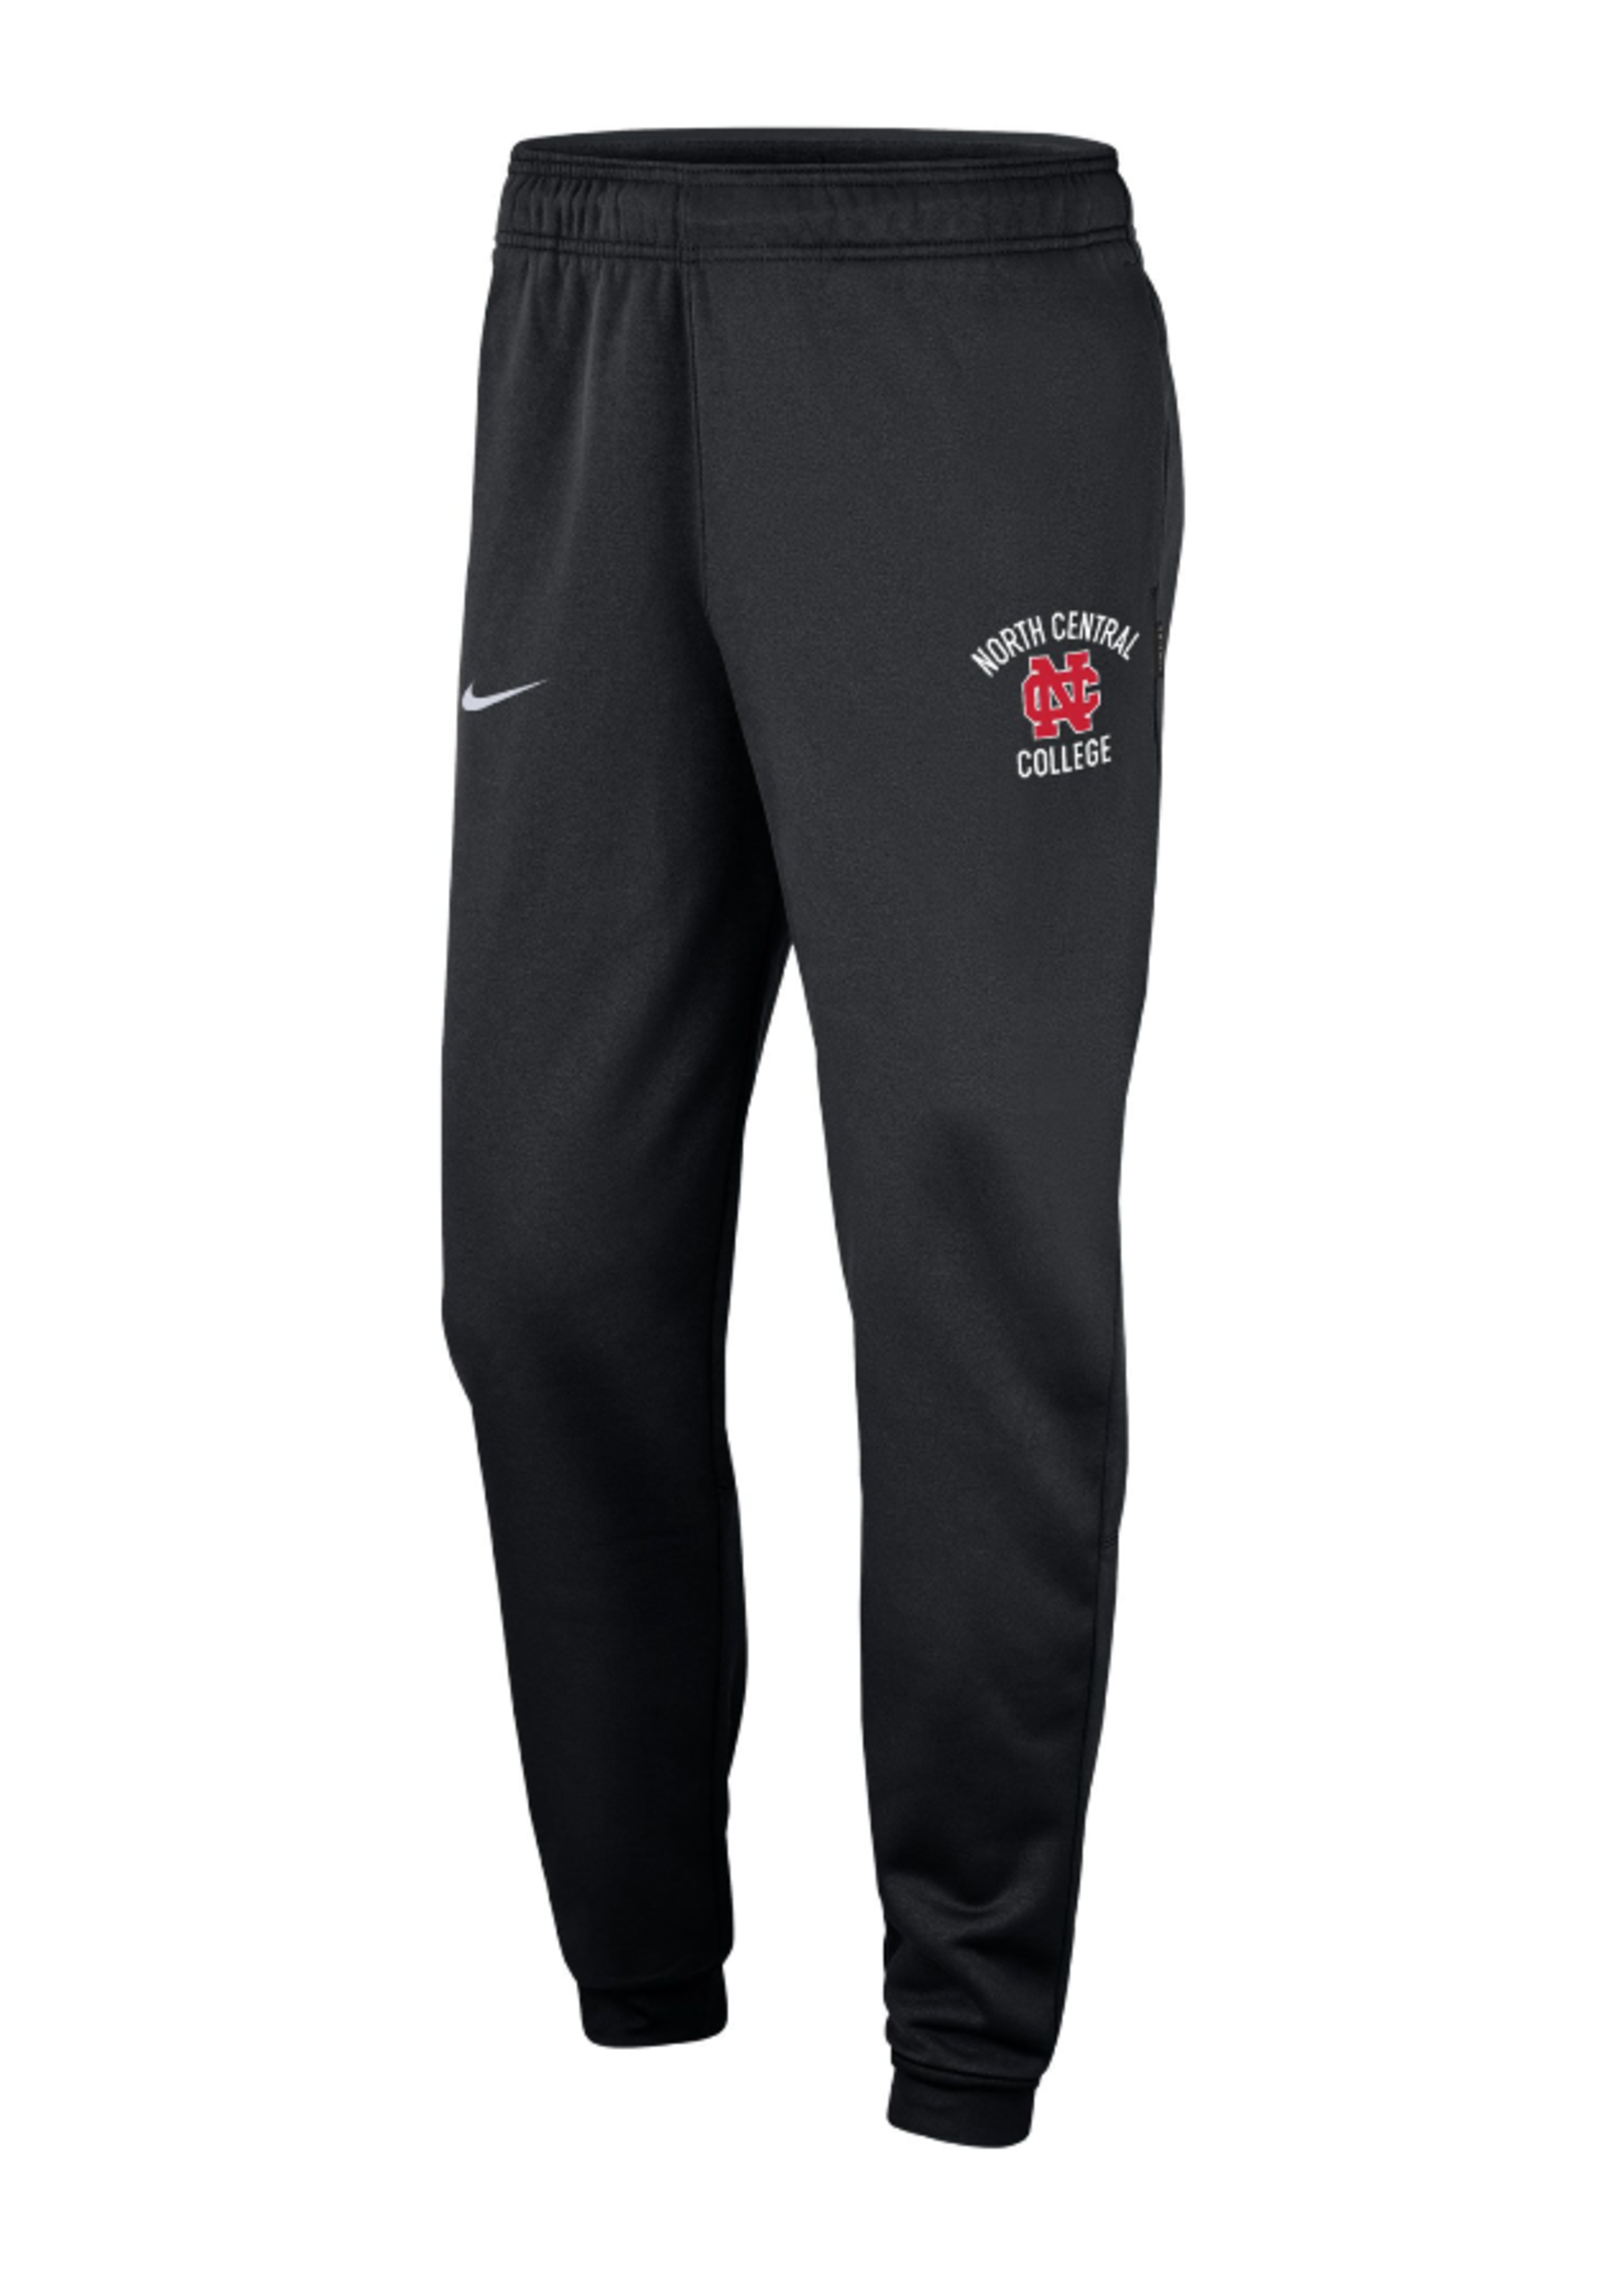 Nike North Central College Therma Pants